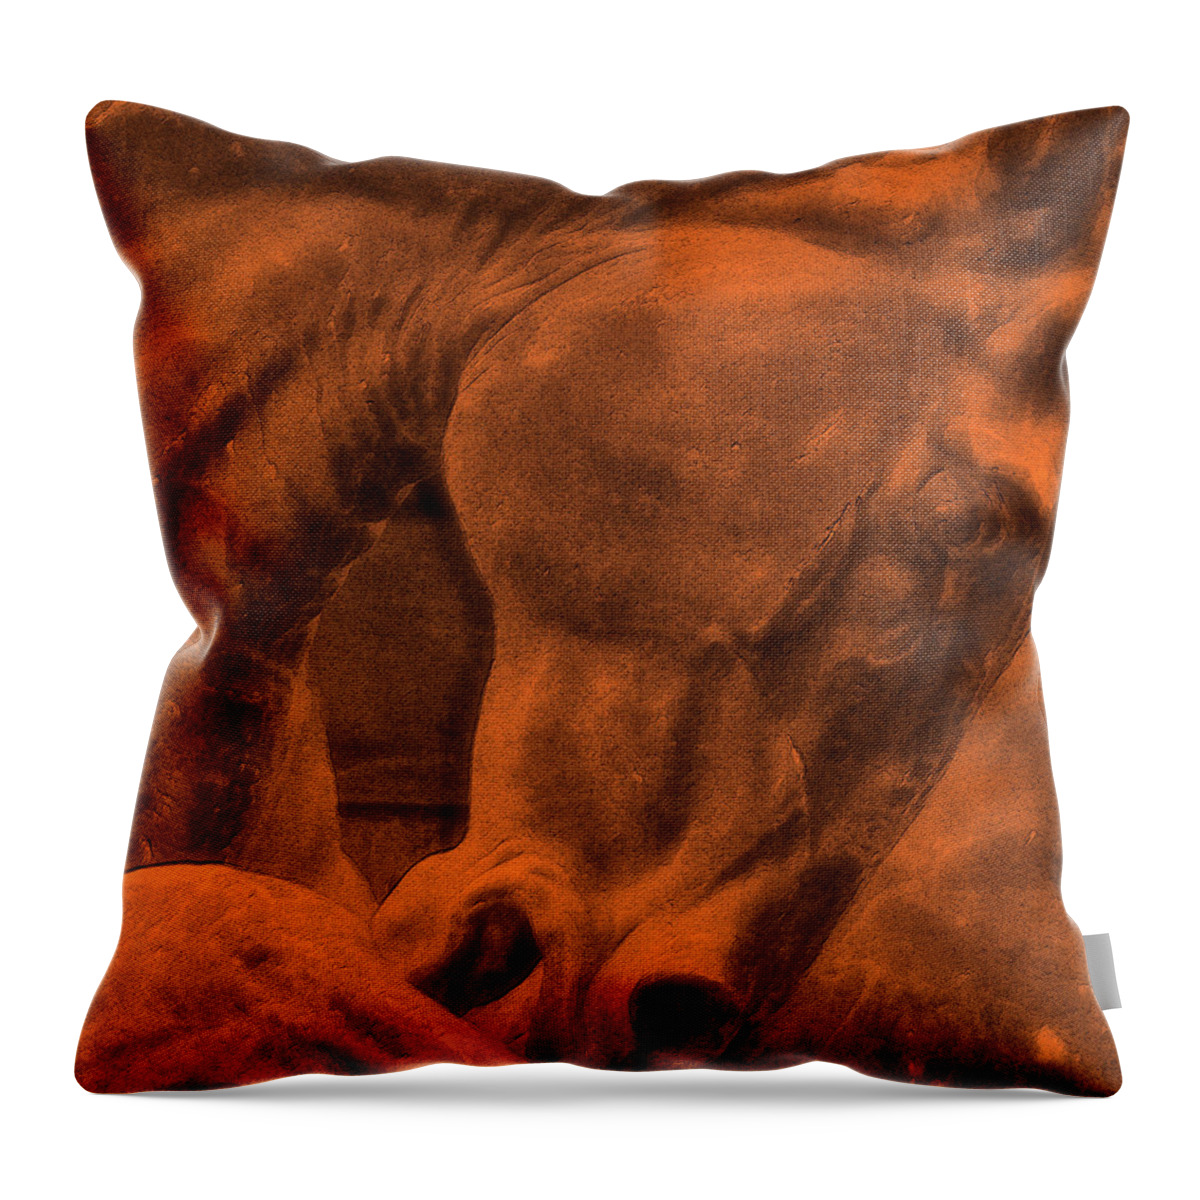 1991 Throw Pillow featuring the photograph Red Horse Art by Dressage Design